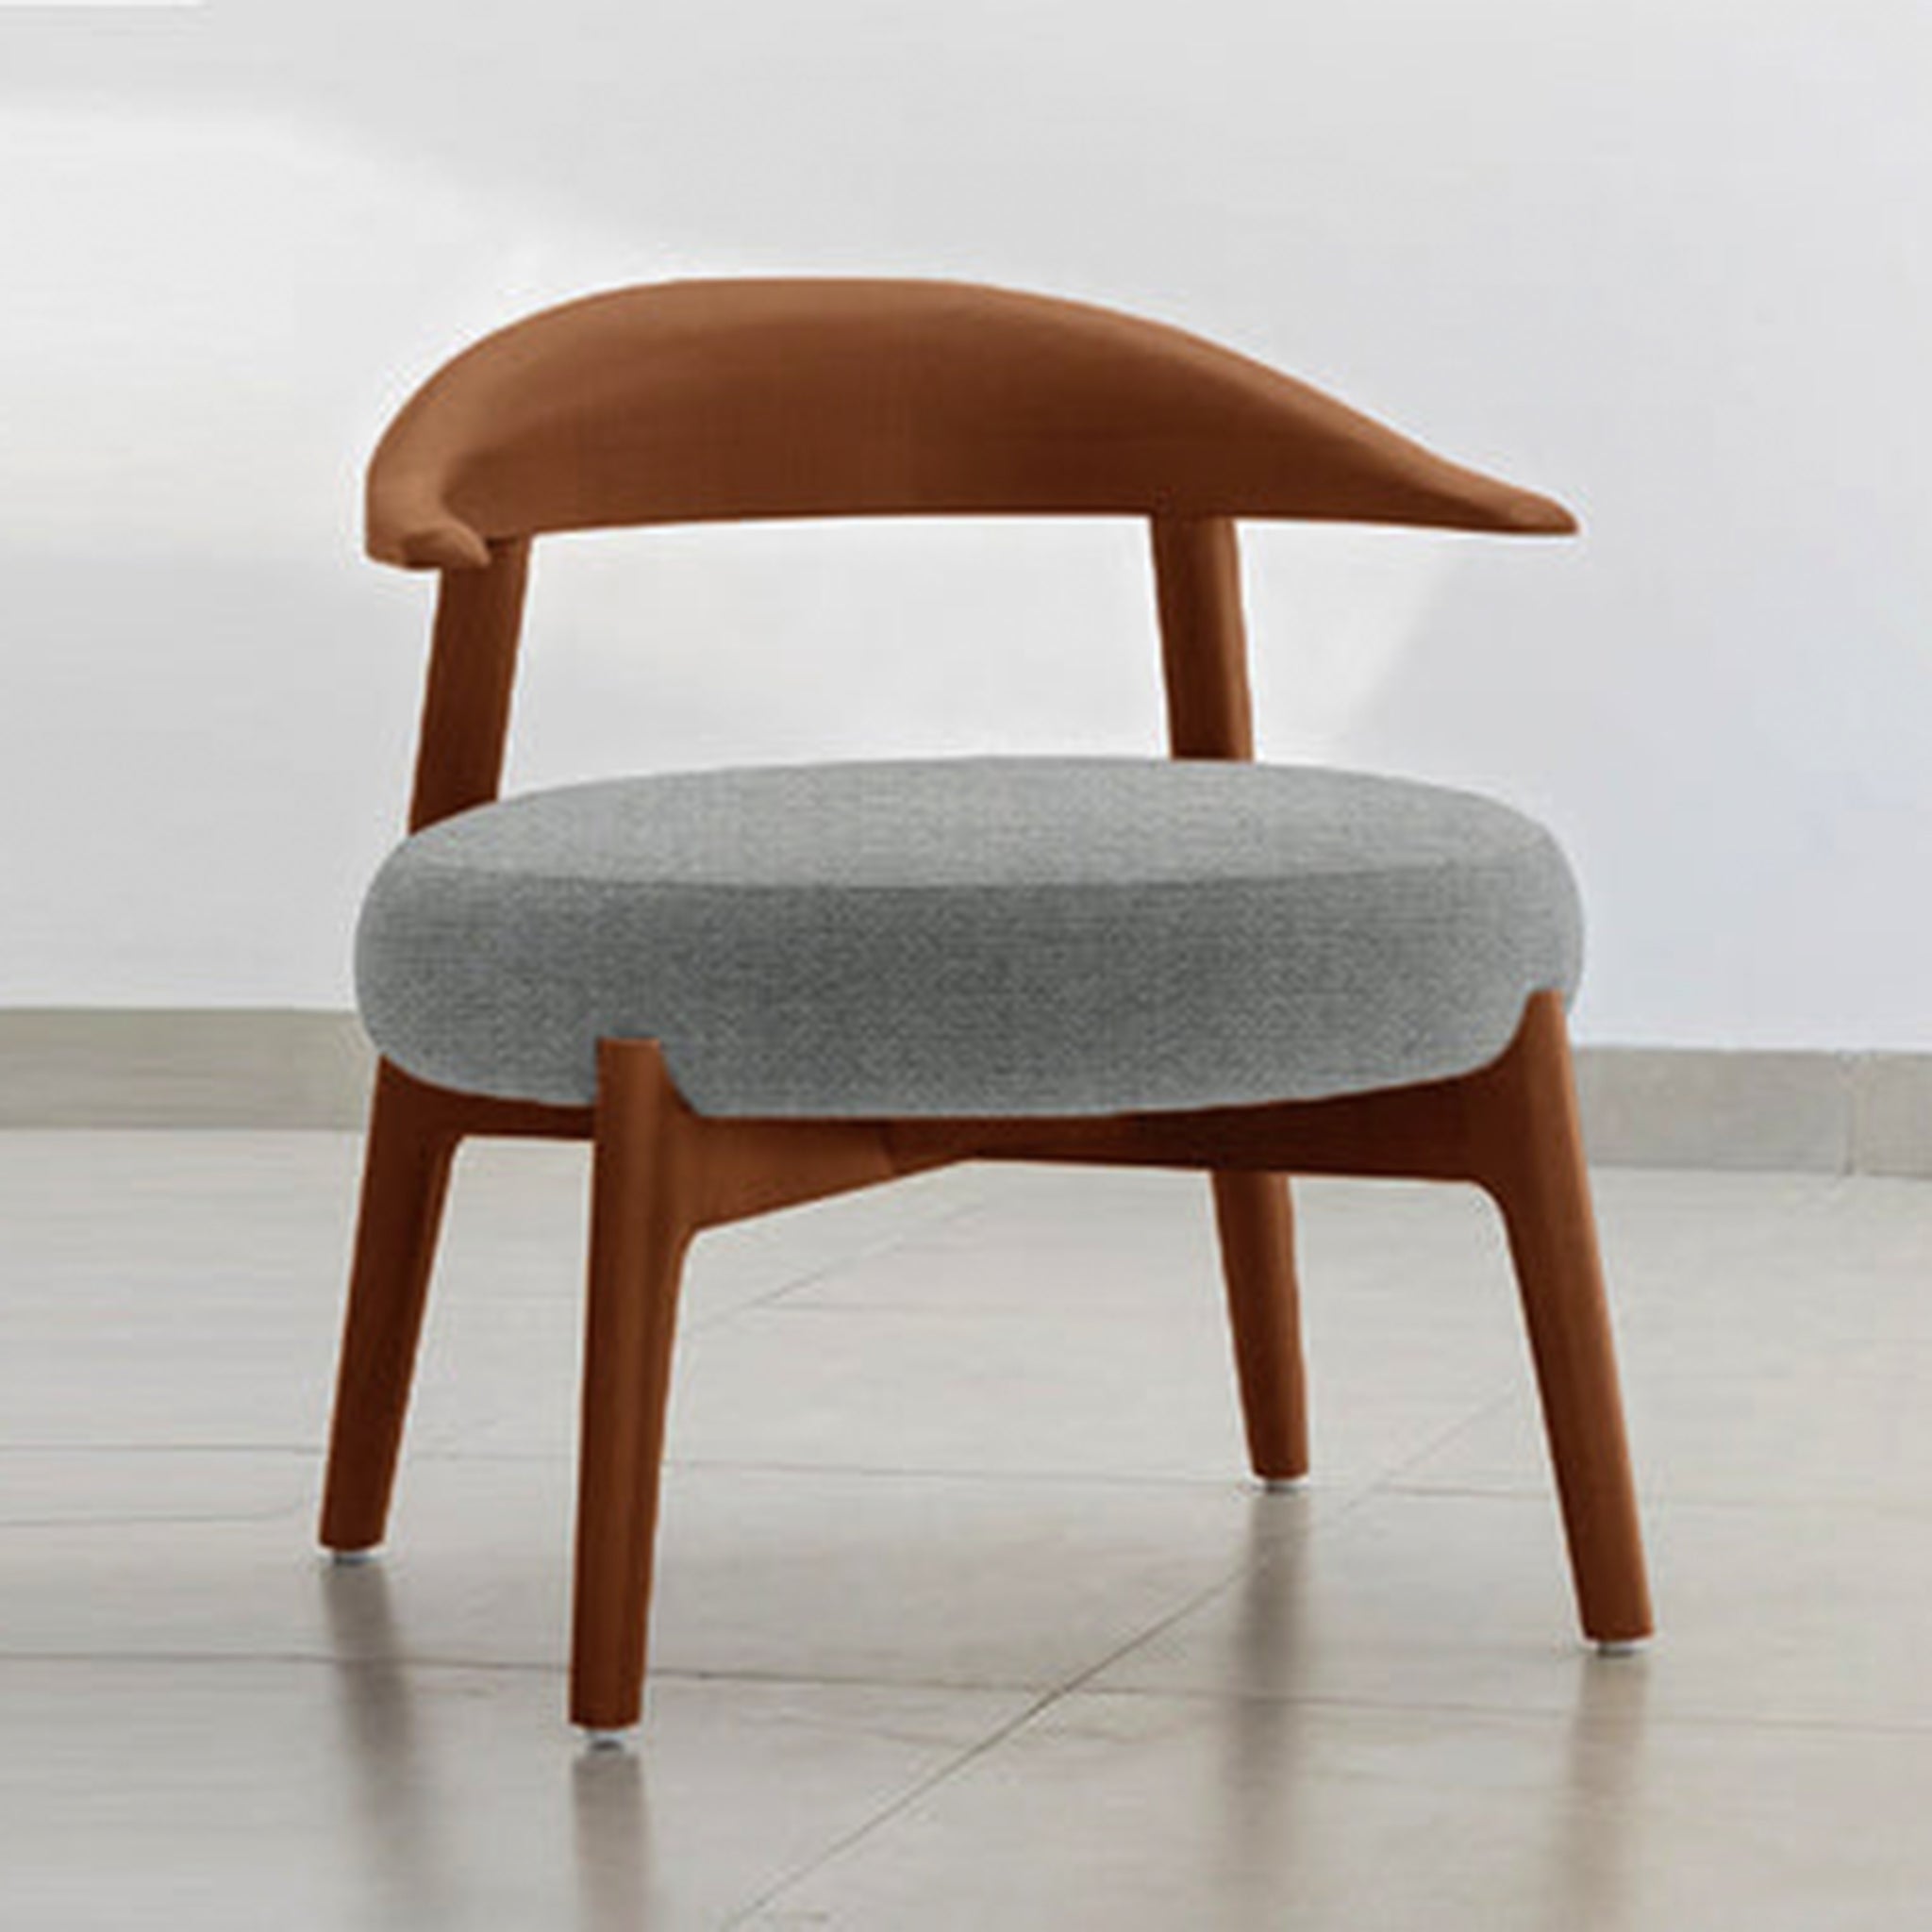 "The Hyde Accent Chair with unique wooden frame and comfortable fabric"